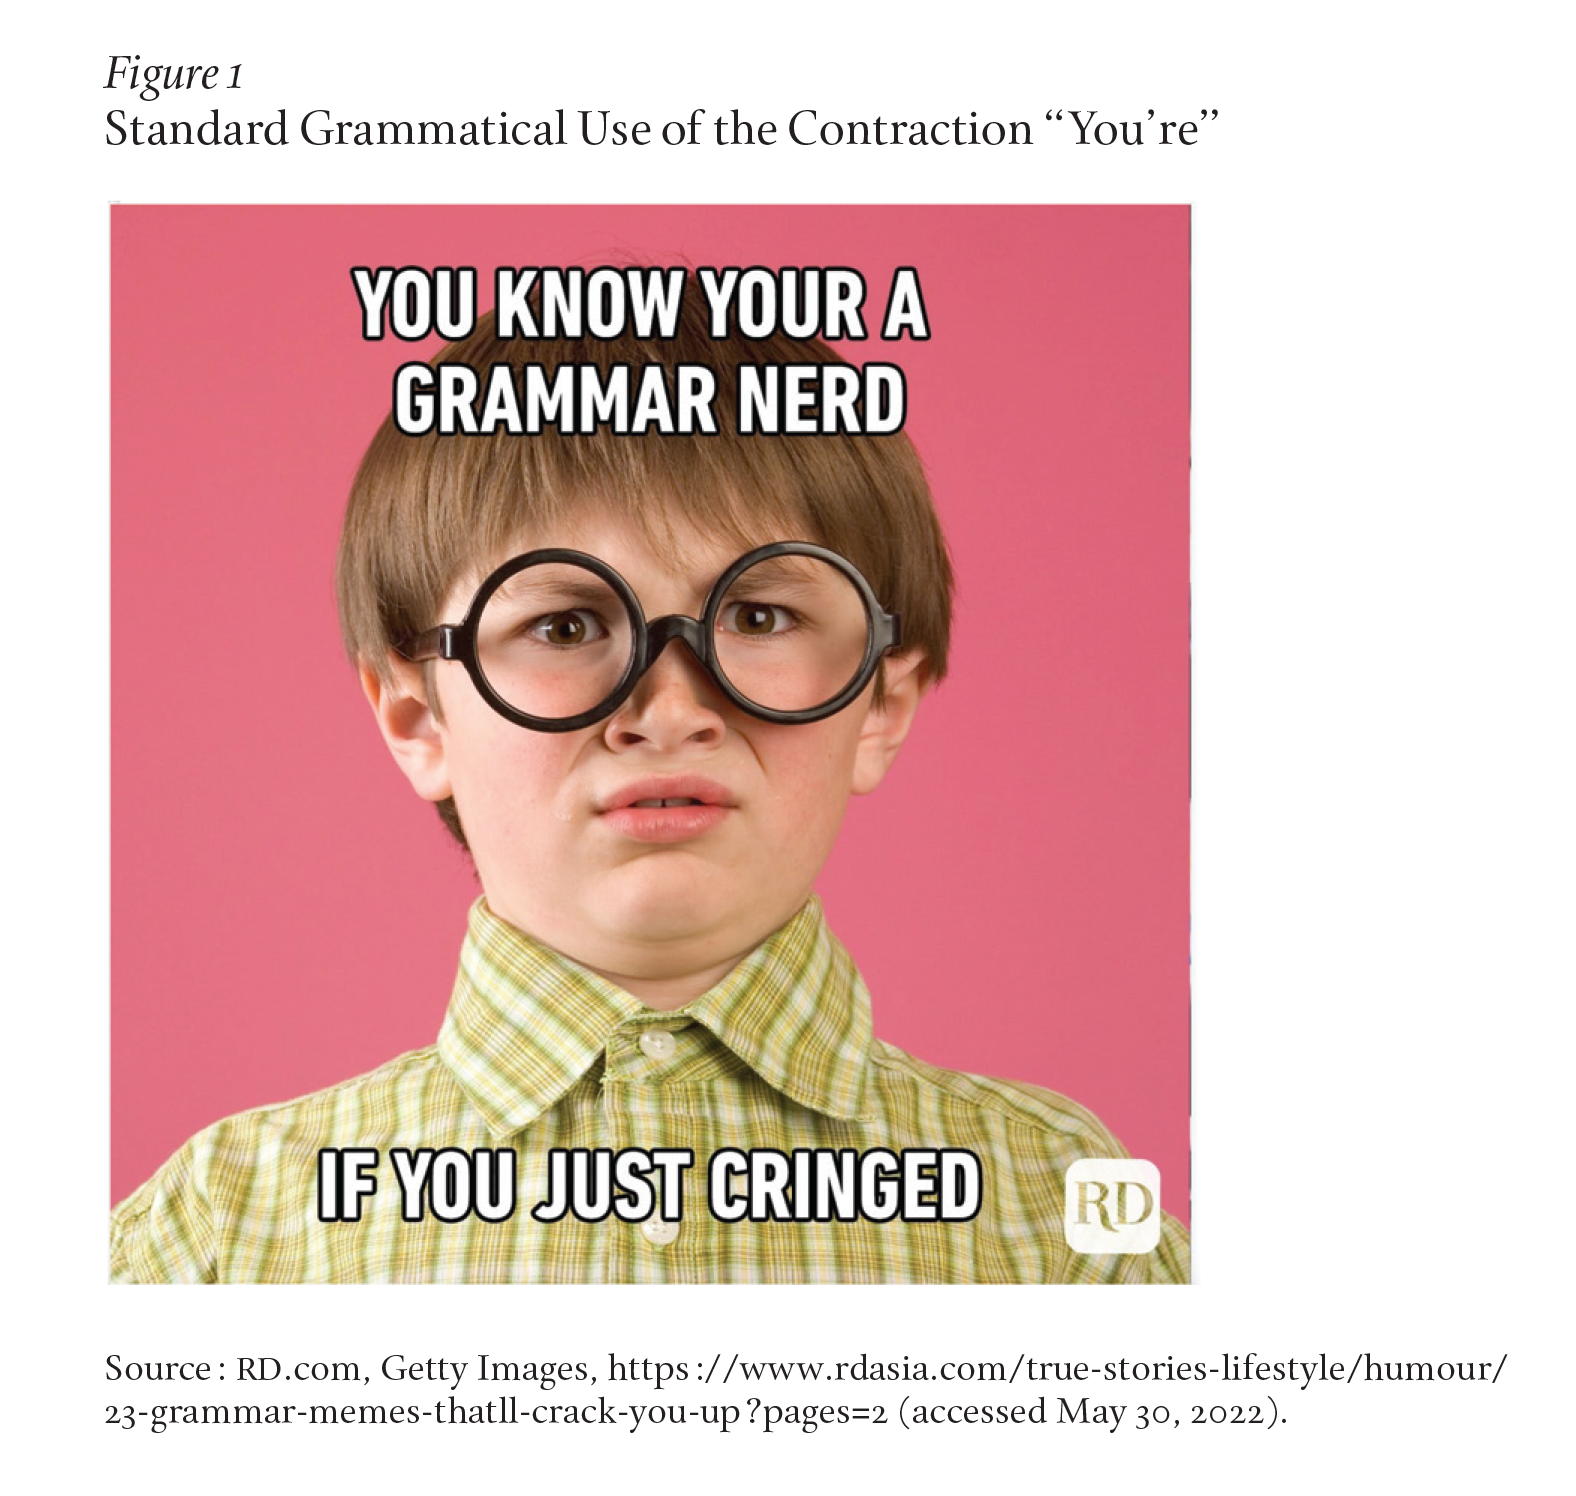 A child wears fake plastic glasses and cringes. Text on the image: You know your a grammar nerd if you just cringed. Your is spelled Y-O-U-R. Source: RD.com